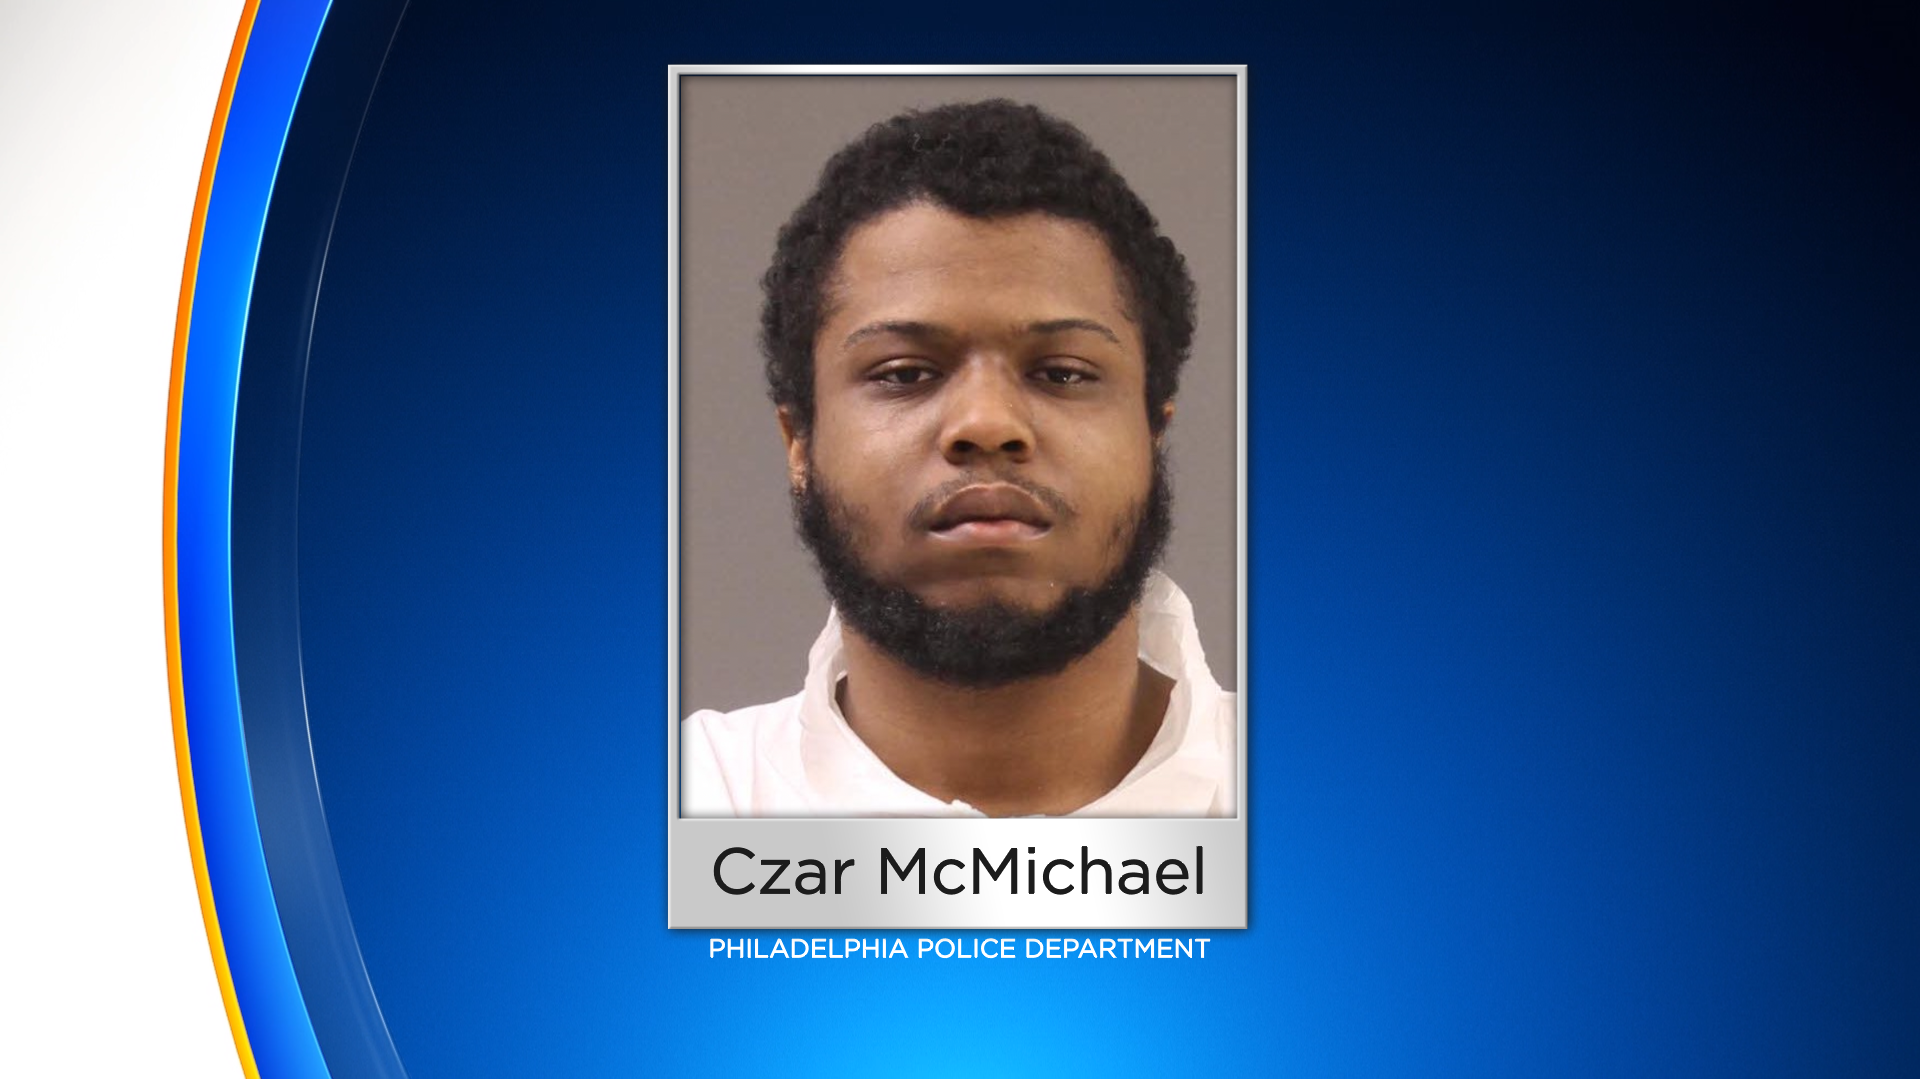 Philadelphia Man Czar McMichael Charged With Murder For Shooting, Killing Grandfather, Other Man In Double Homicide: Police